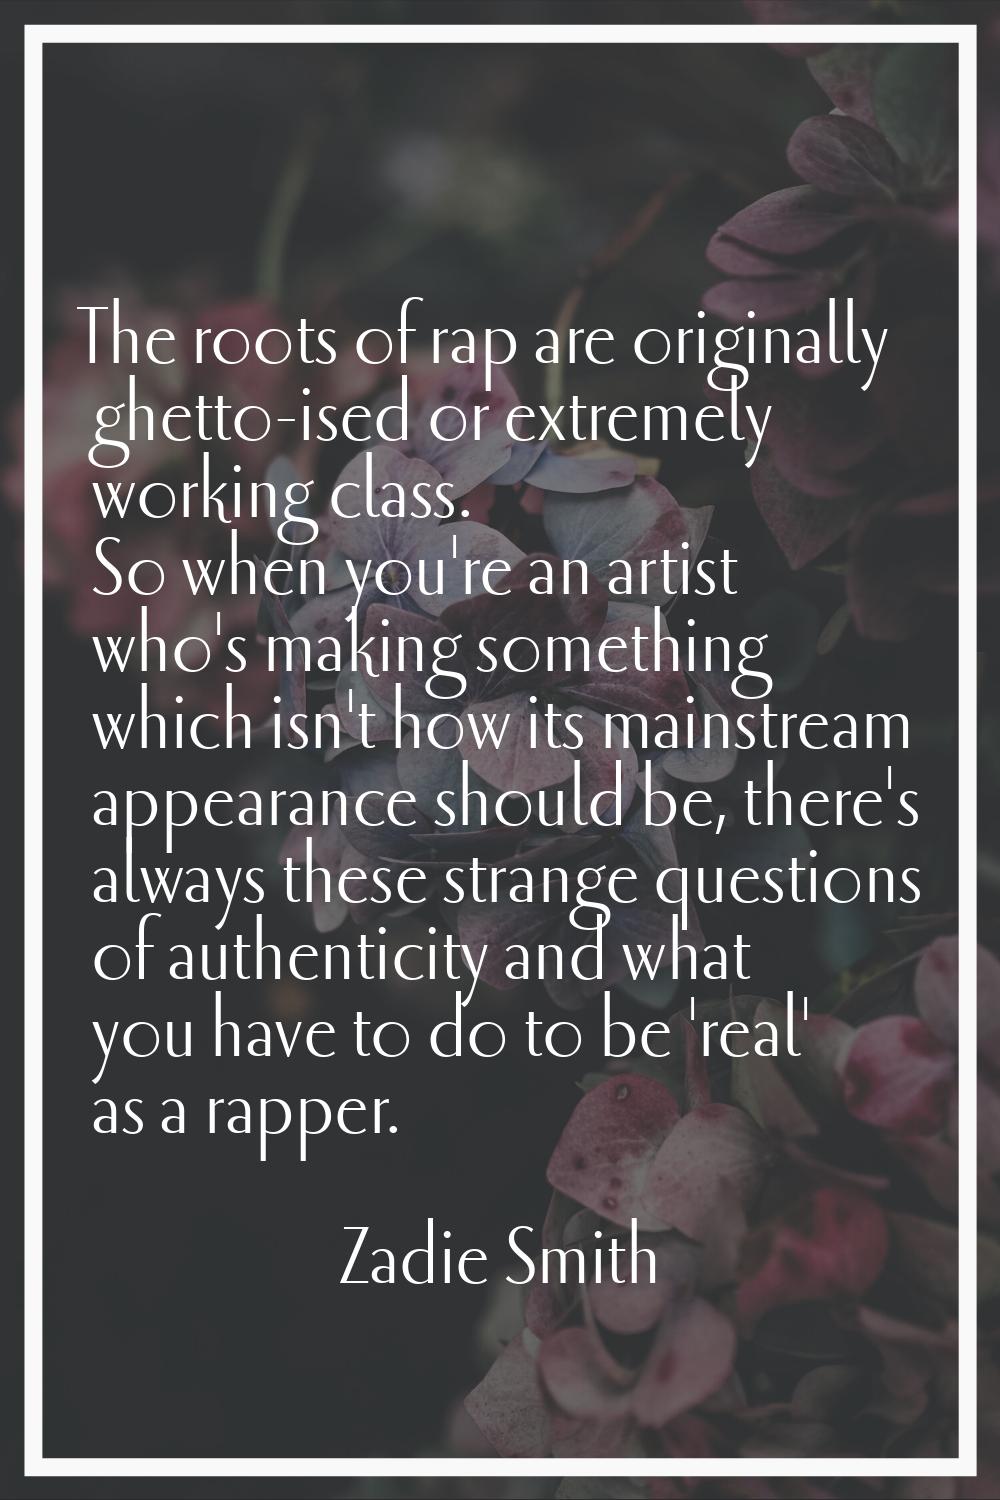 The roots of rap are originally ghetto-ised or extremely working class. So when you're an artist wh